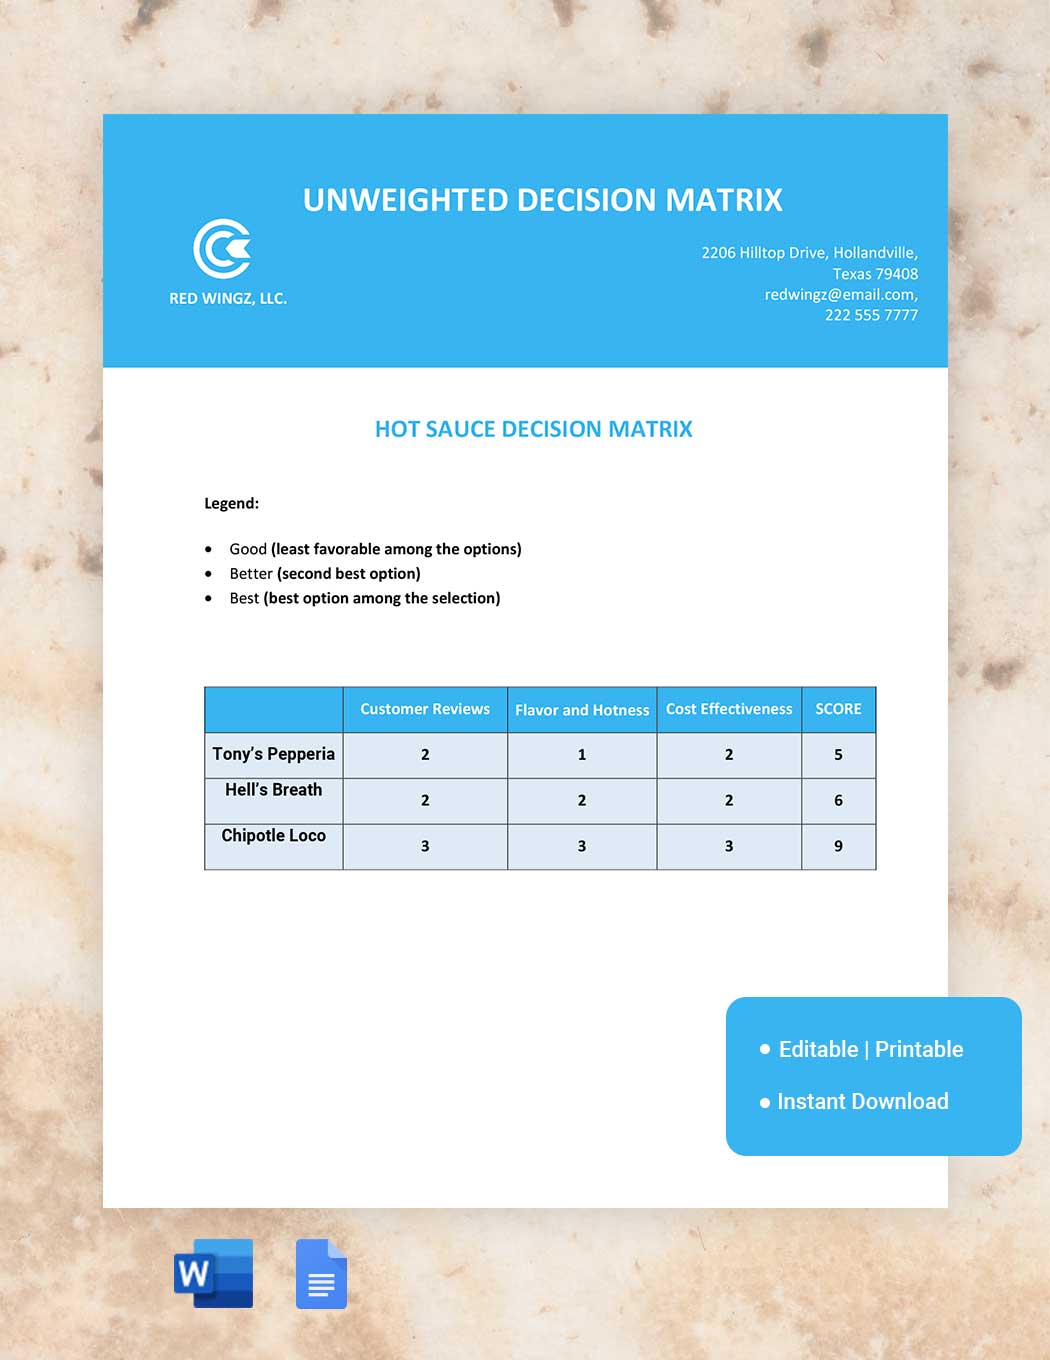 Unweighted Decision Matrix Template in Word, Google Docs